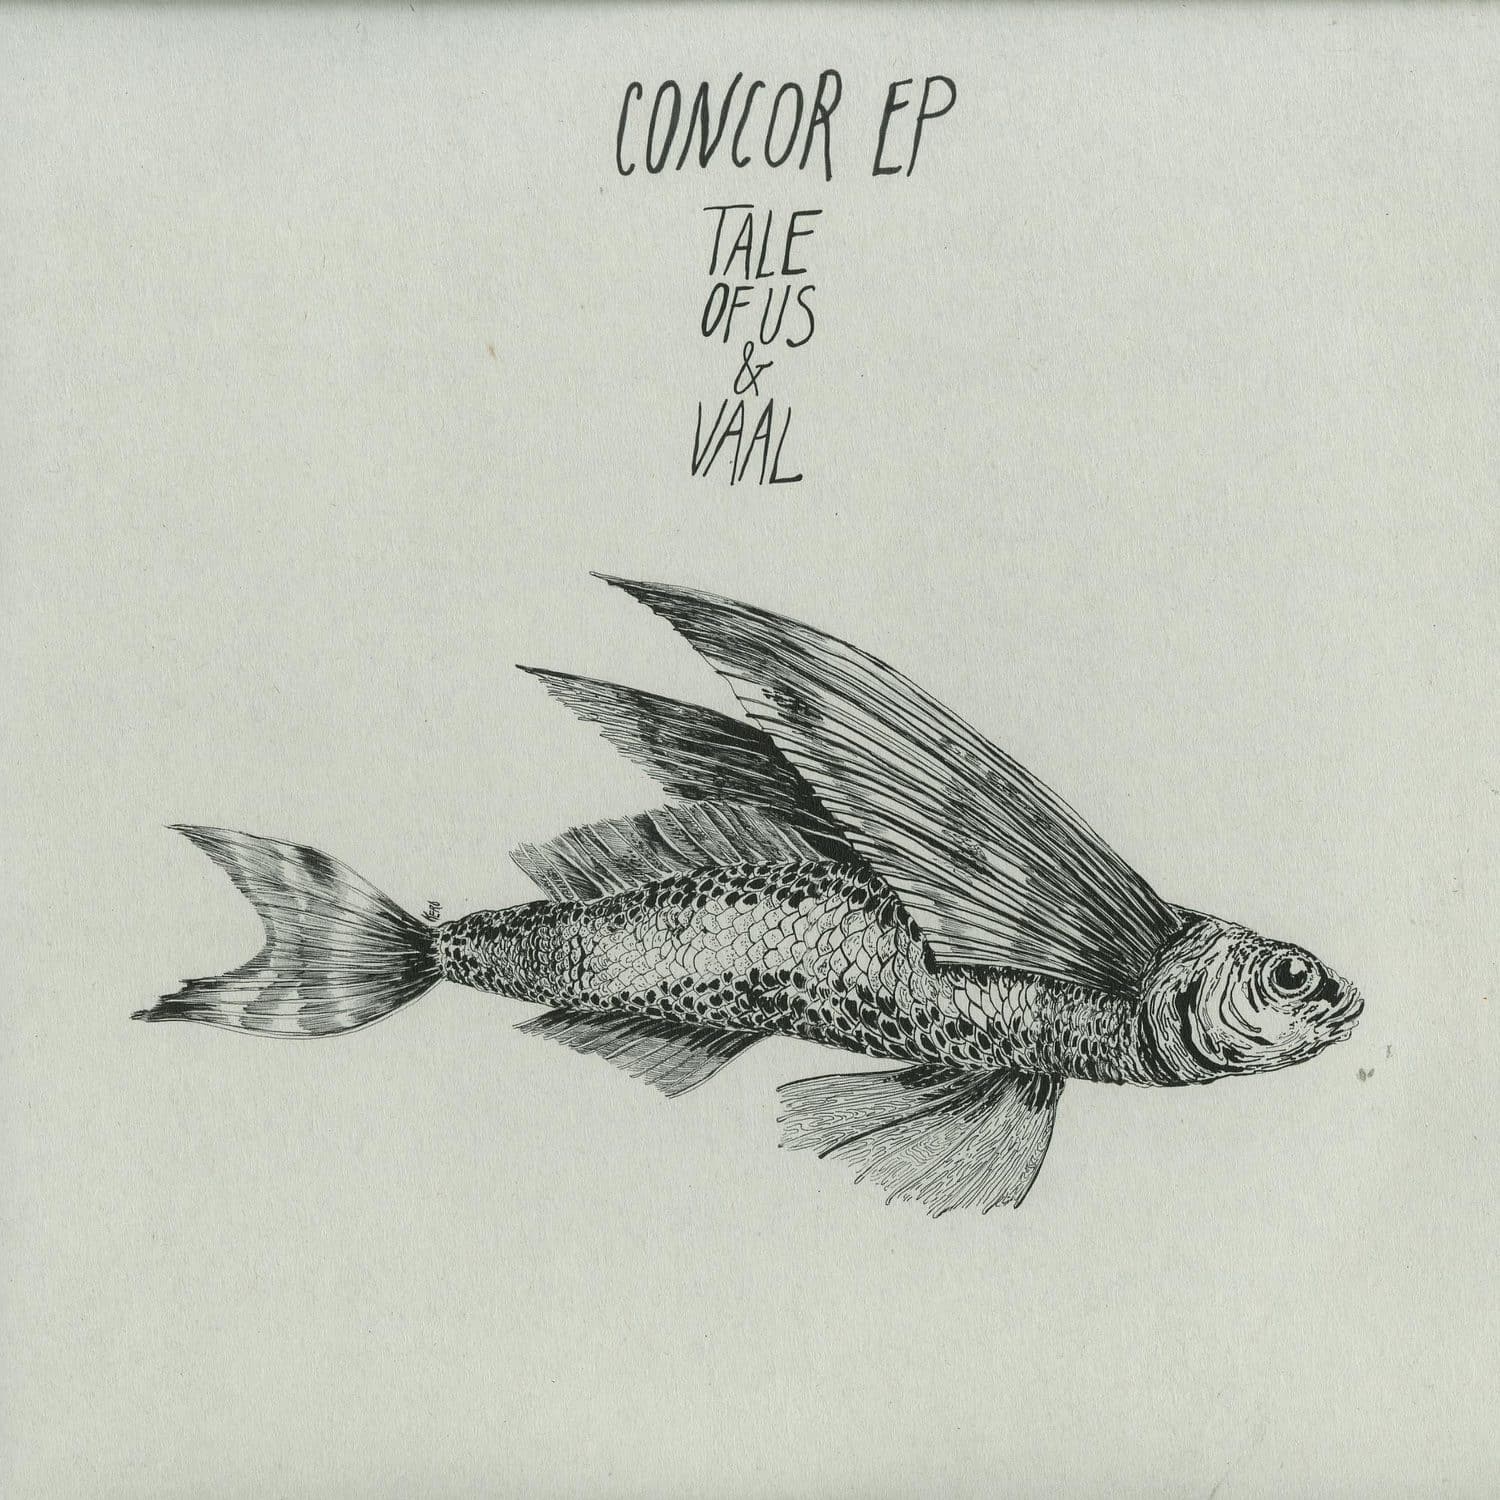 Tale Of Us & Vaal - CONCOR EP